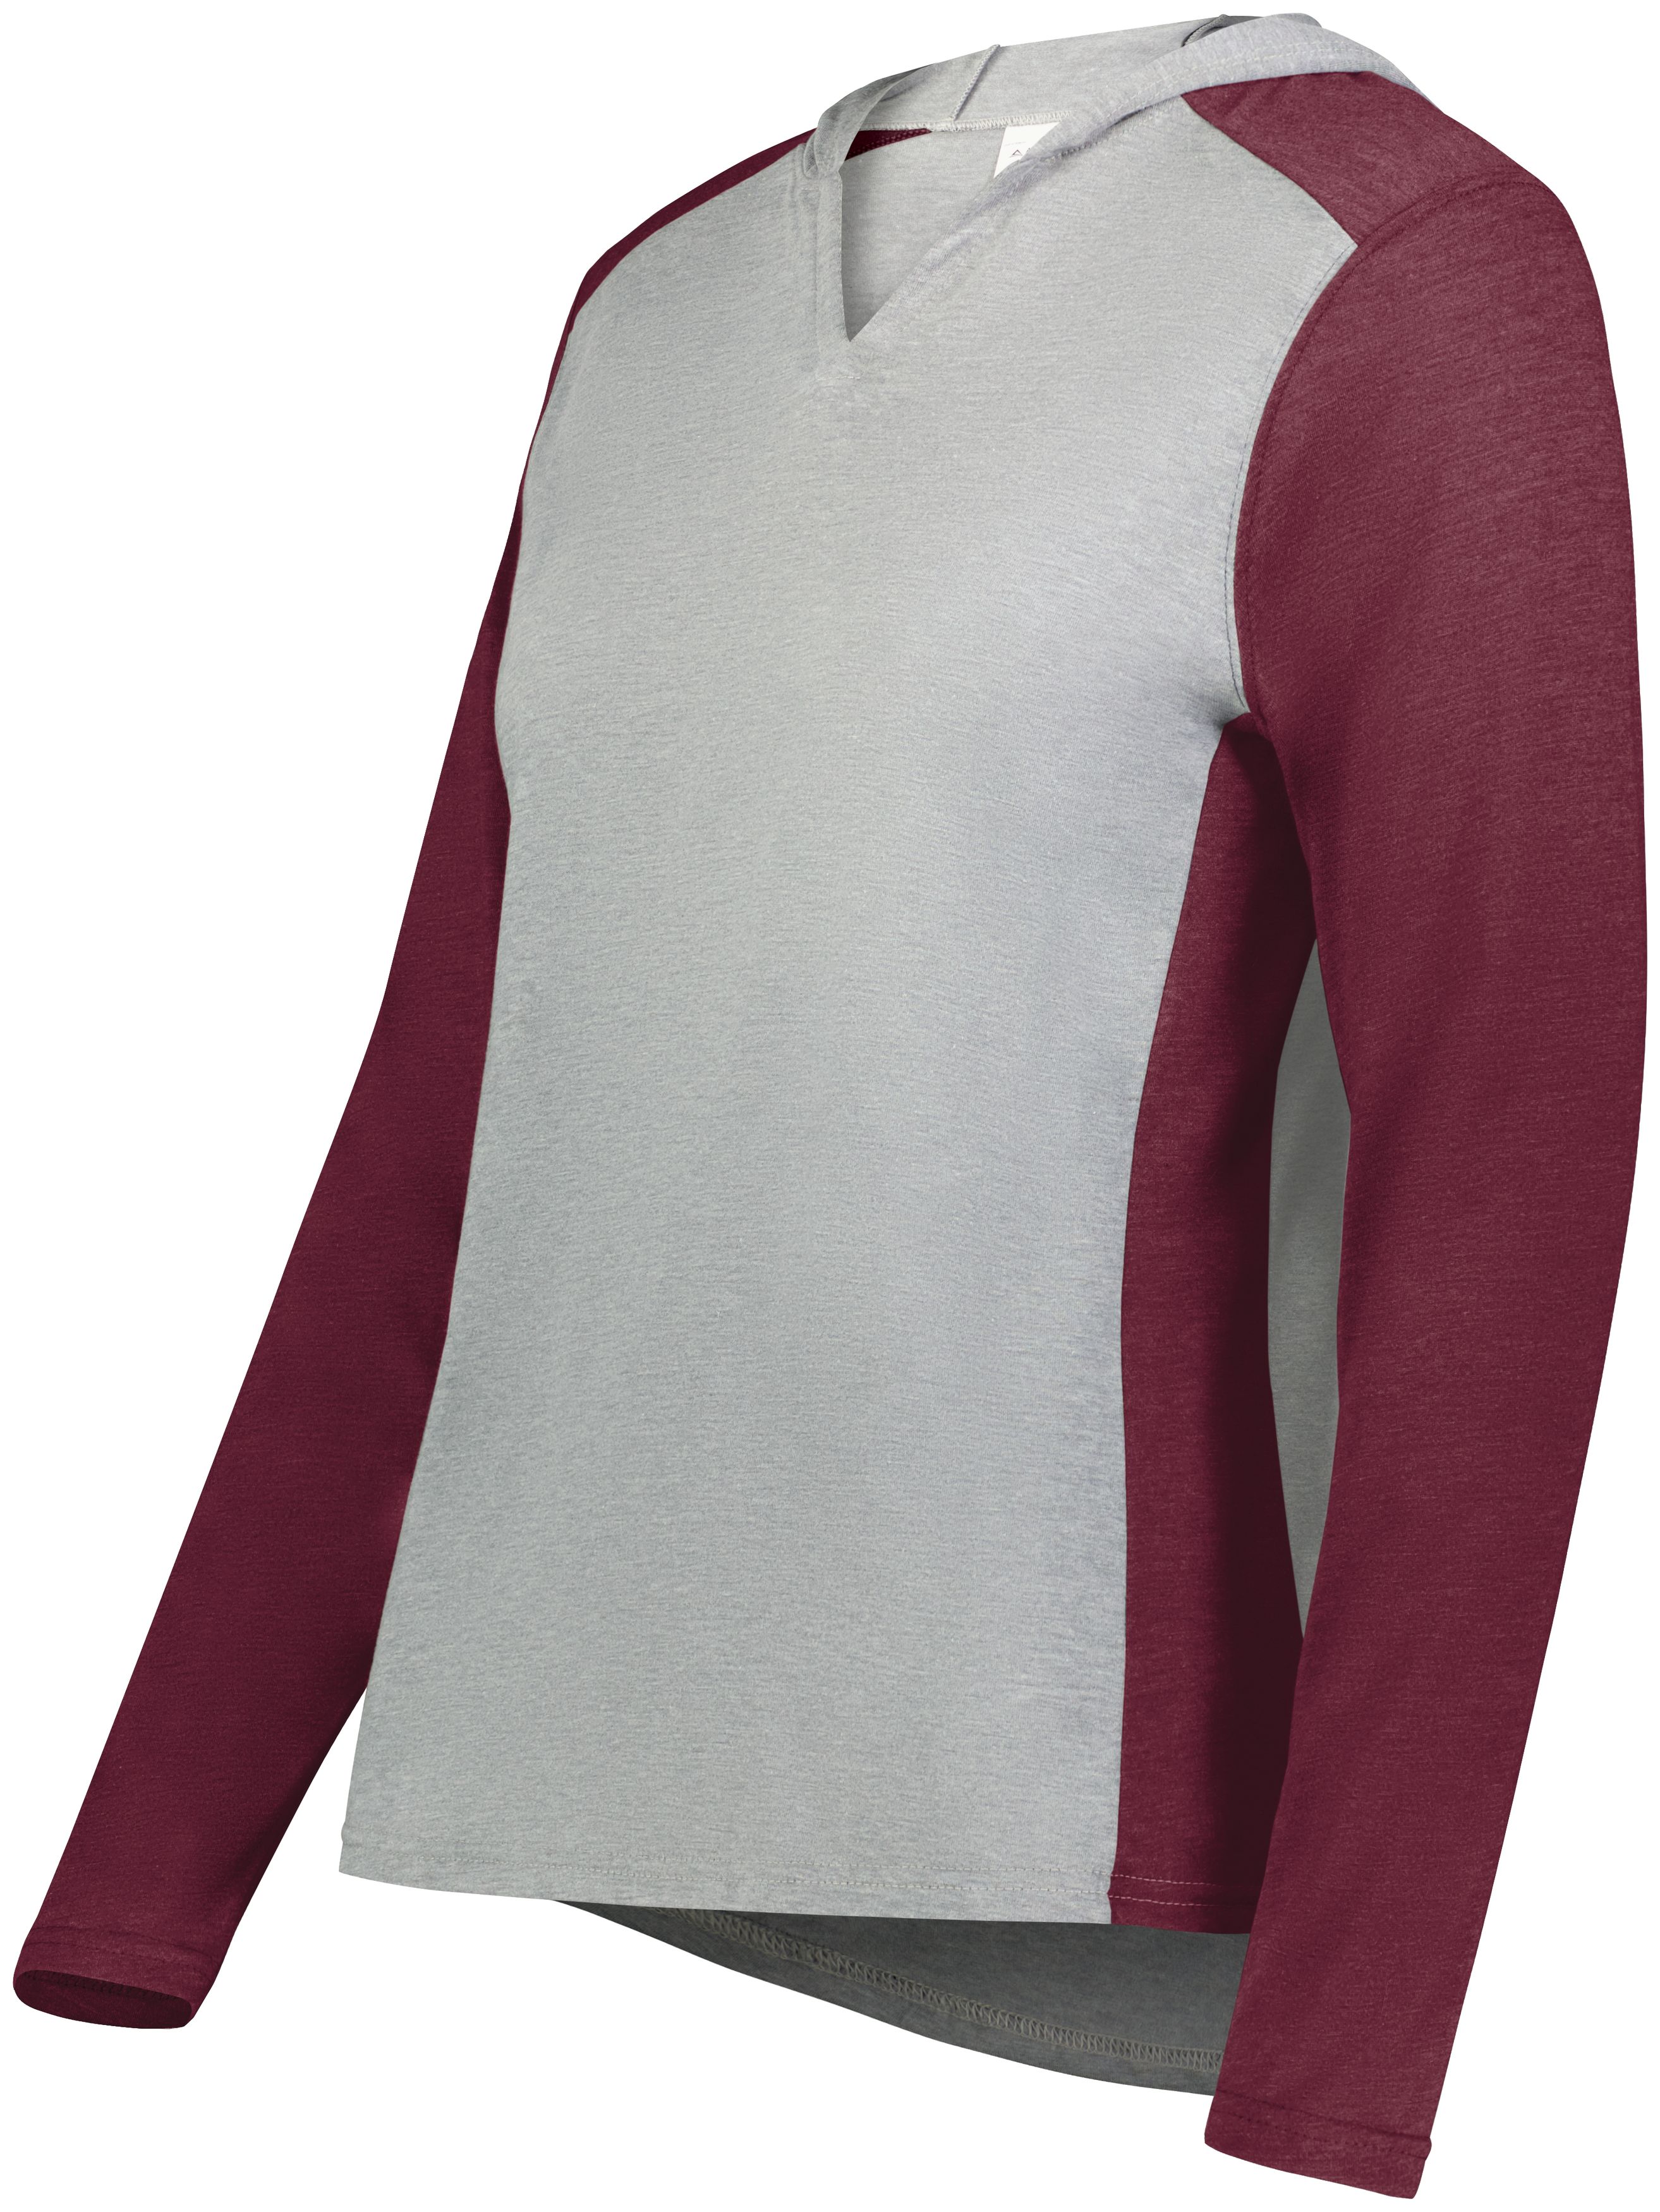 click to view Grey Heather/Maroon Heather